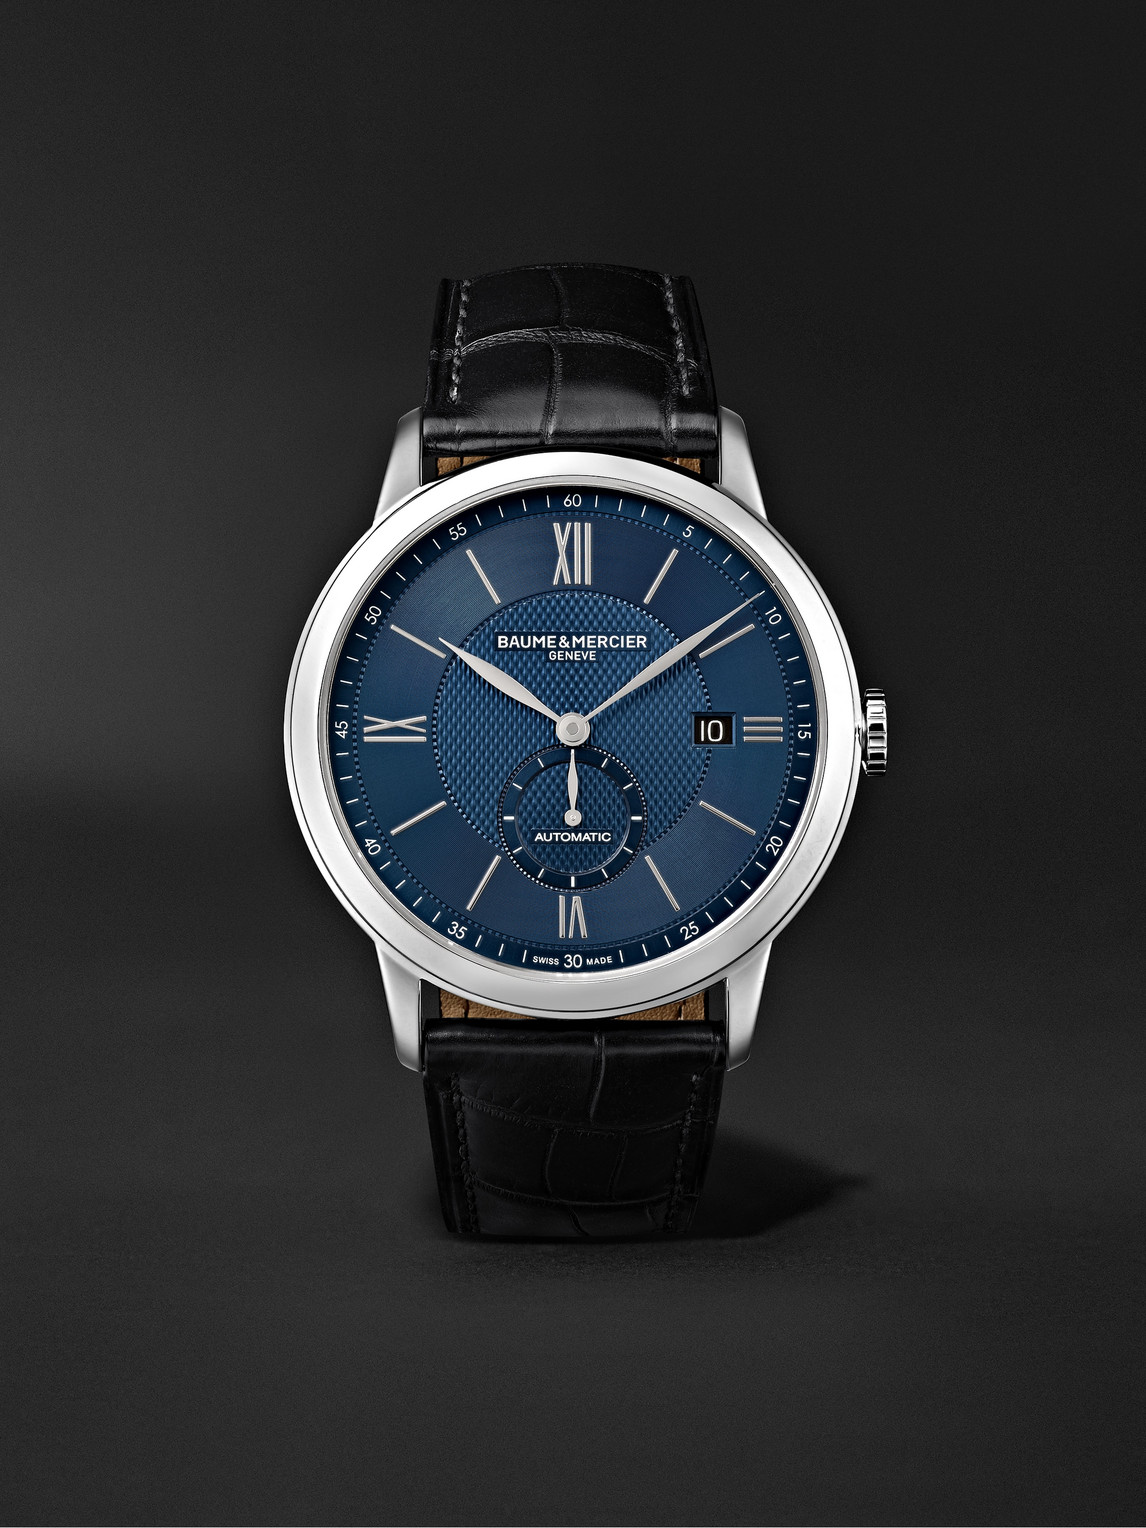 Baume & Mercier Classima Automatic 42mm Stainless Steel And Alligator Watch, Ref. No. 10480 In Blue